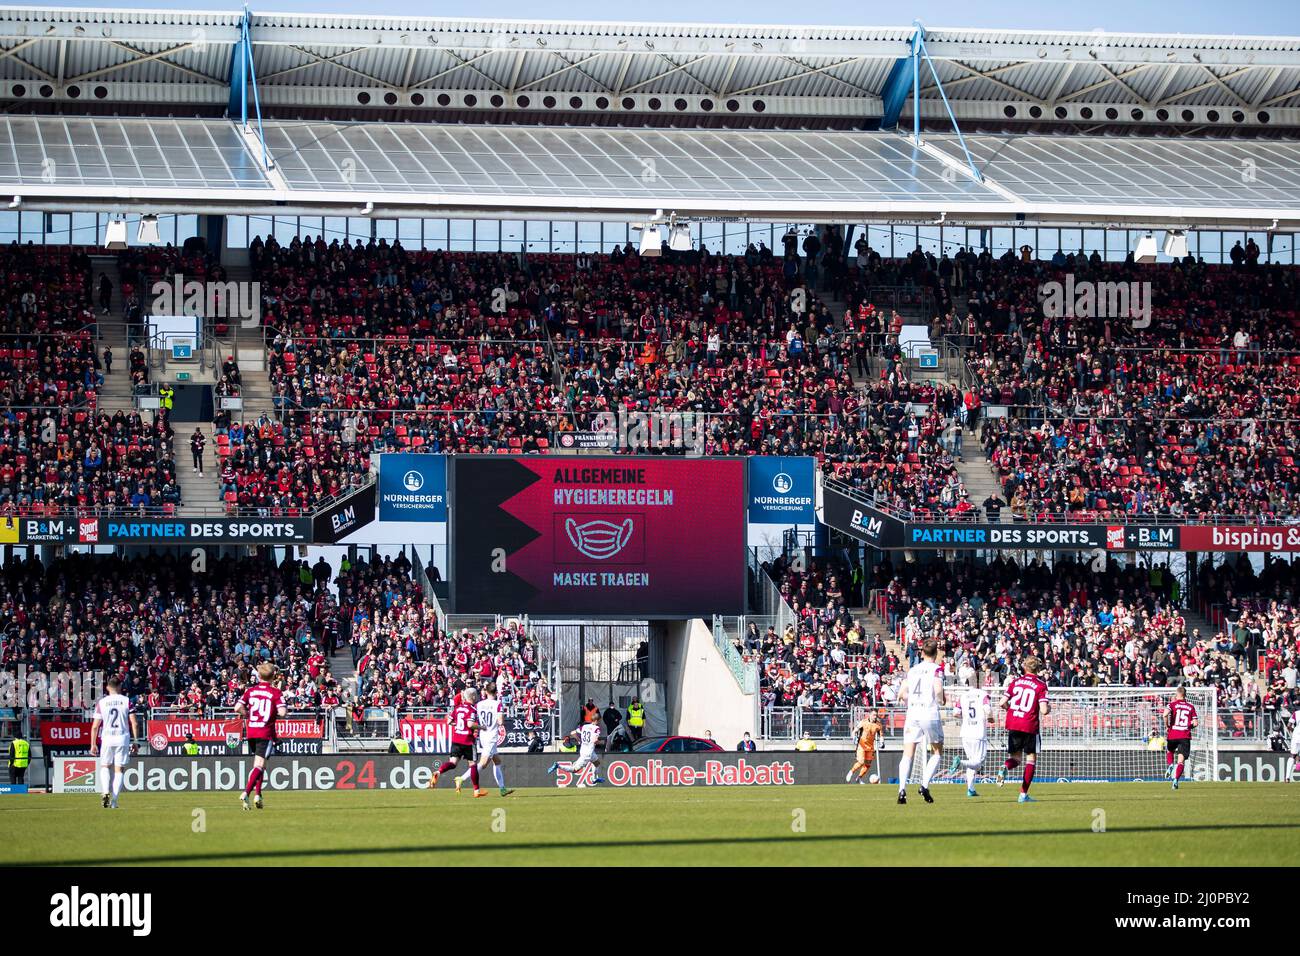 Nuremberg, Germany. 20th Mar, 2022. Soccer: 2. Bundesliga, 1. FC Nürnberg - Dynamo Dresden, Matchday 27, Max-Morlock-Stadion. Overview of the crowded Max Morlock Stadium during the match. The scoreboard reads 'Wear mask'. Credit: Tom Weller/dpa - IMPORTANT NOTE: In accordance with the requirements of the DFL Deutsche Fußball Liga and the DFB Deutscher Fußball-Bund, it is prohibited to use or have used photographs taken in the stadium and/or of the match in the form of sequence pictures and/or video-like photo series./dpa/Alamy Live News Stock Photo